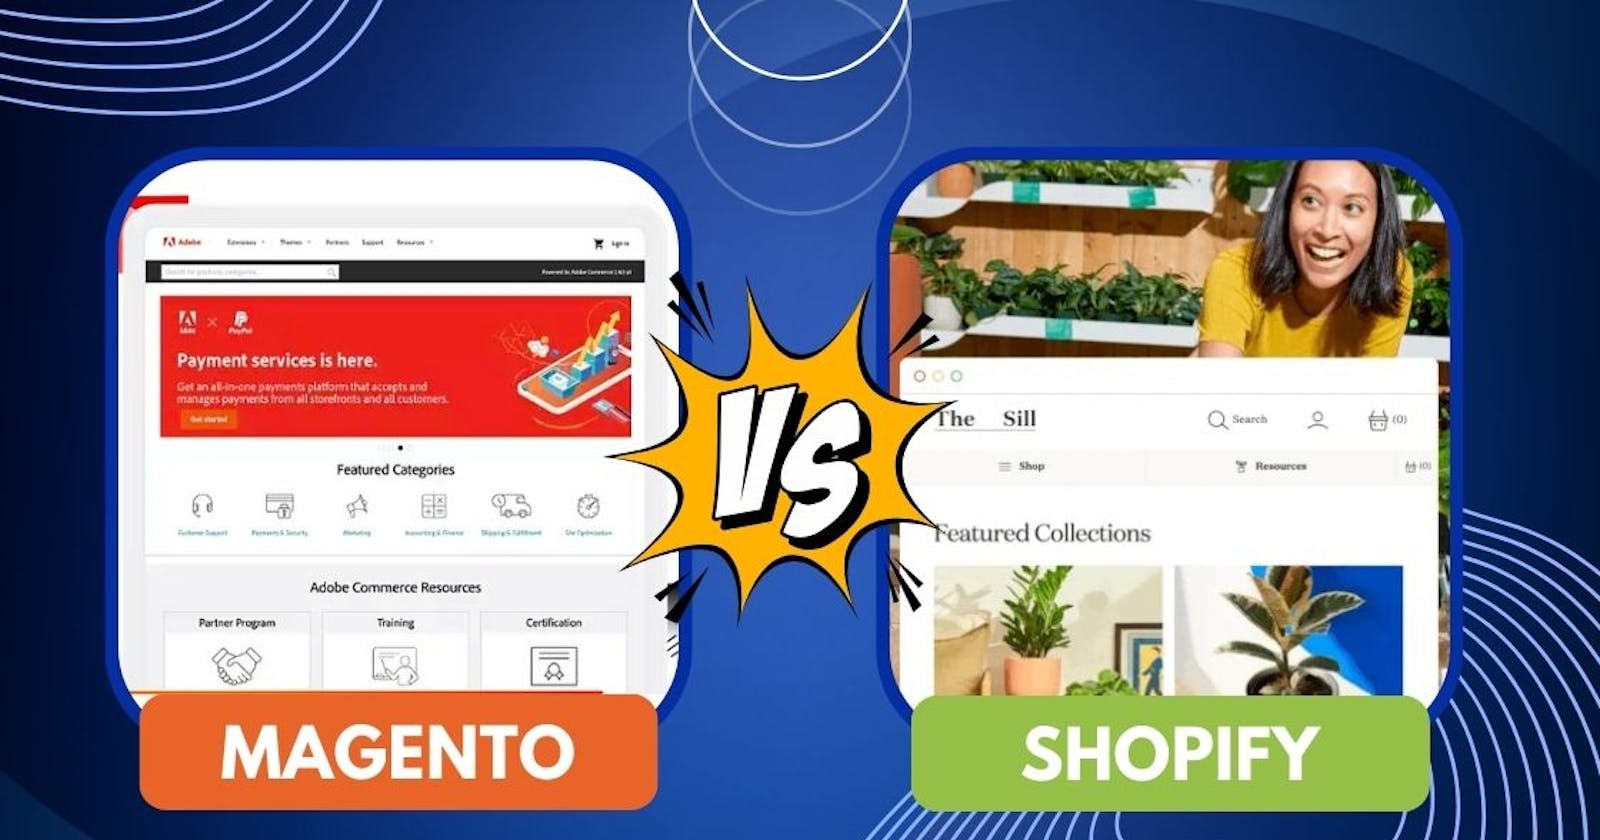 Magento vs Shopify: Making the Right Choice for Your eCommerce Business